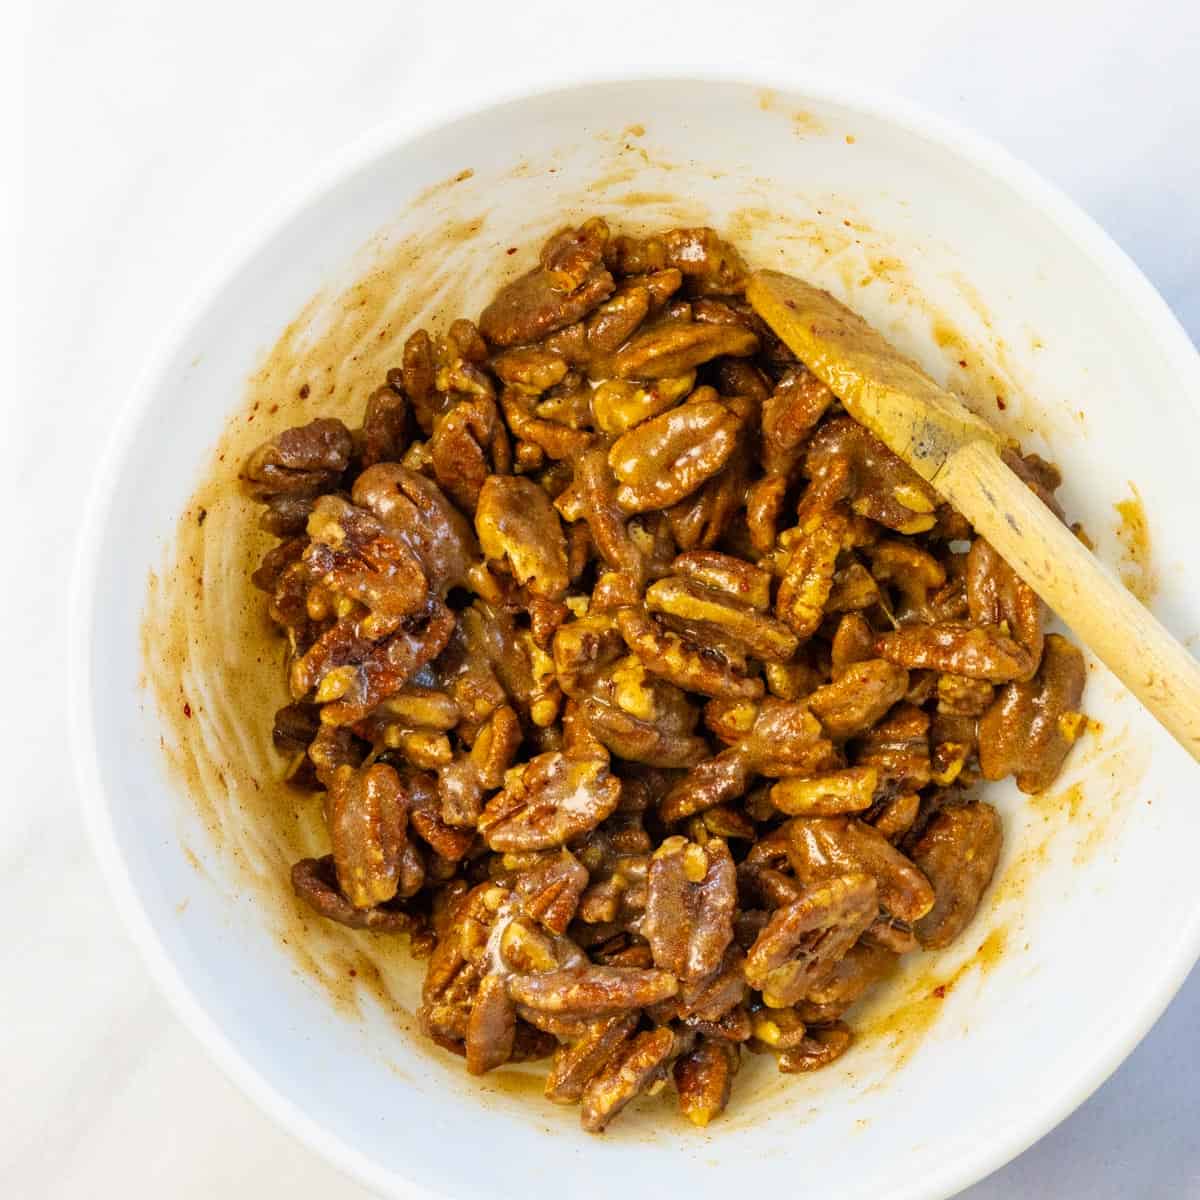 Raw pecans stirred into a mixing bowl with a wooden spoon to coat with egg white and spices.